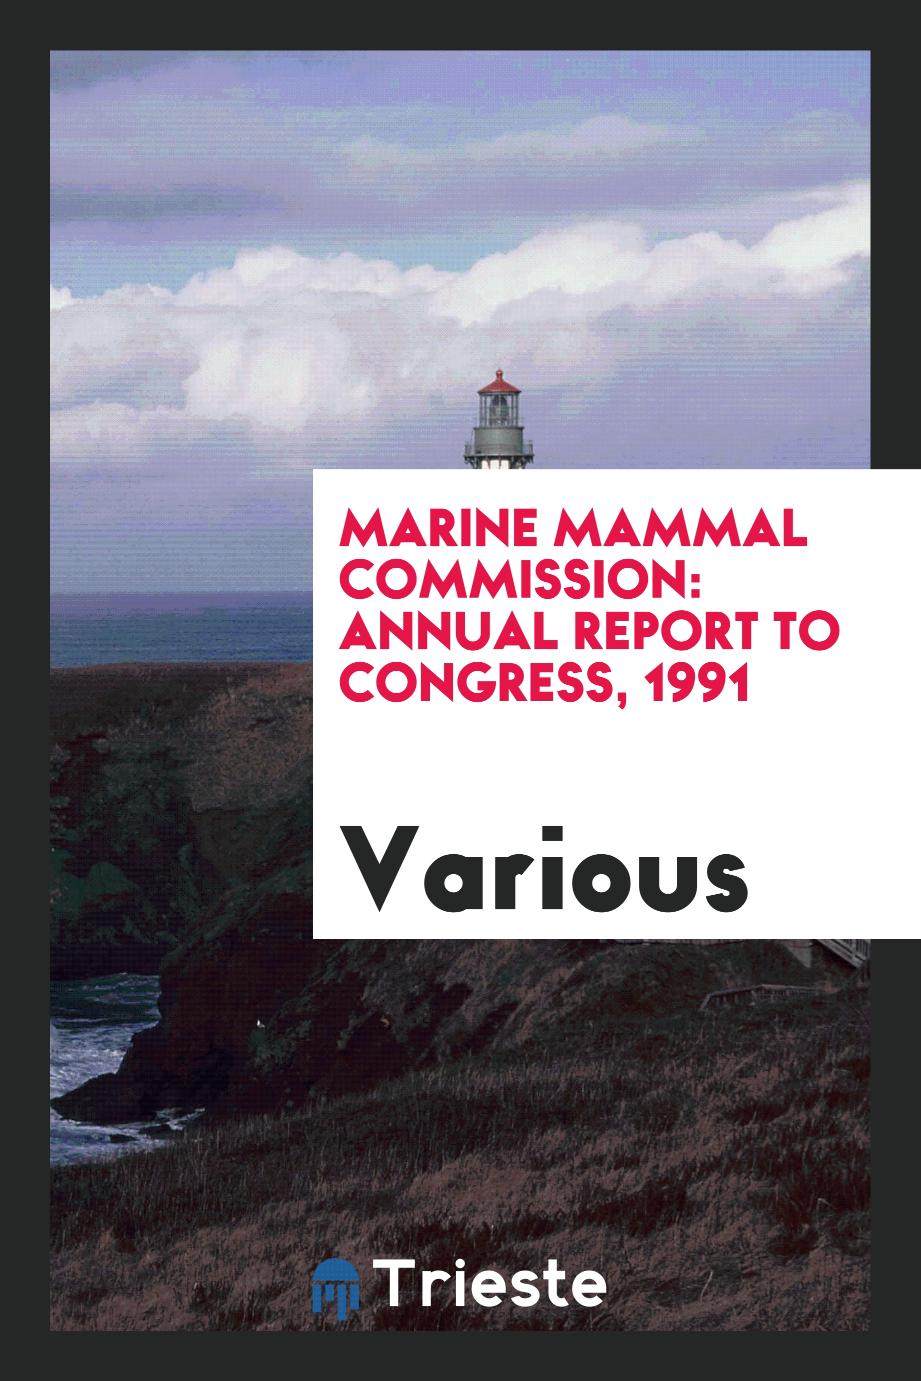 Marine Mammal Commission: Annual report to Congress, 1991